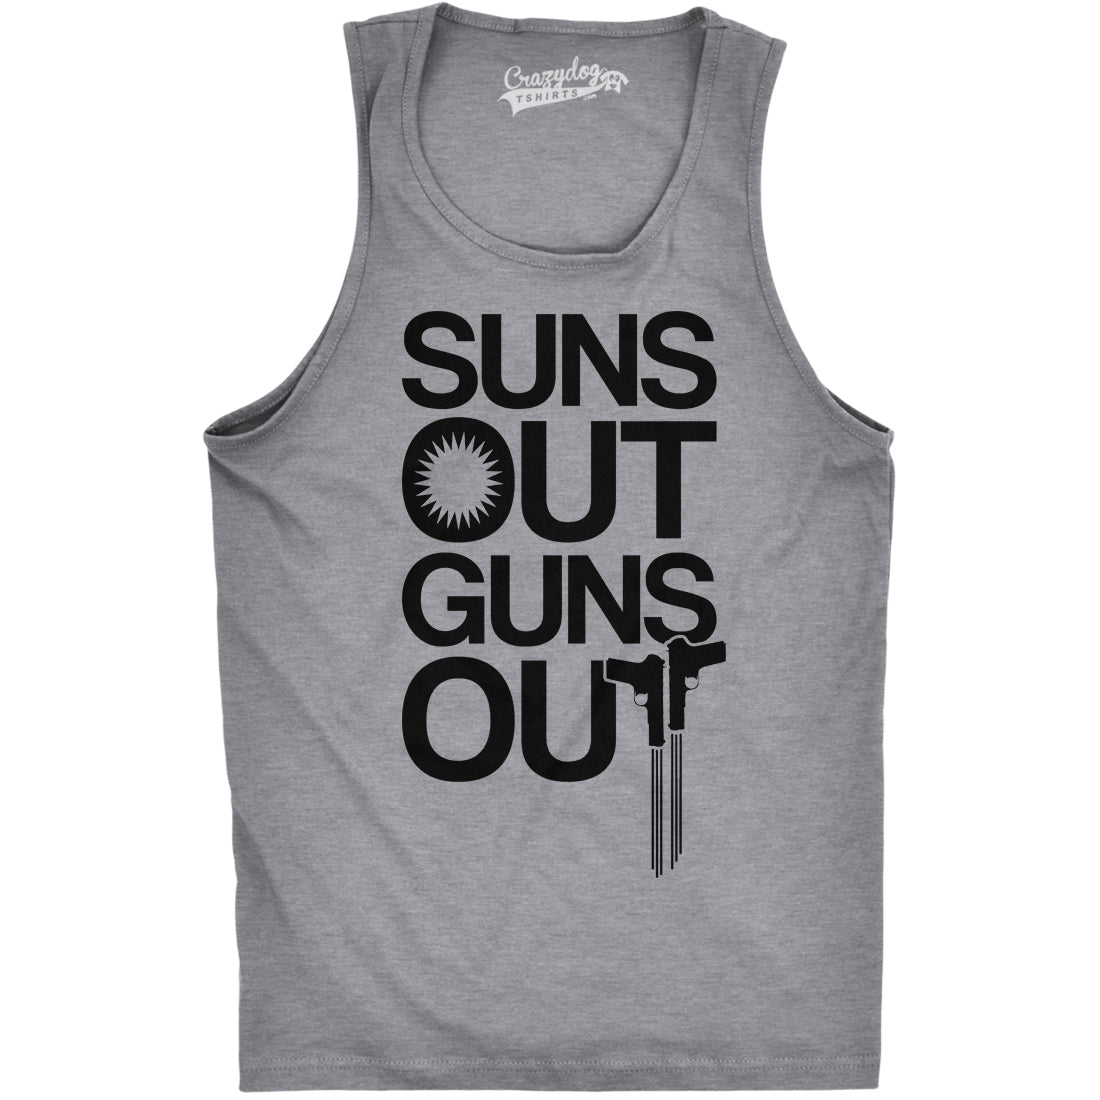 Funny Light Heather Grey Suns Out Guns Out Mens Tank Top Nerdy Fitness Tee